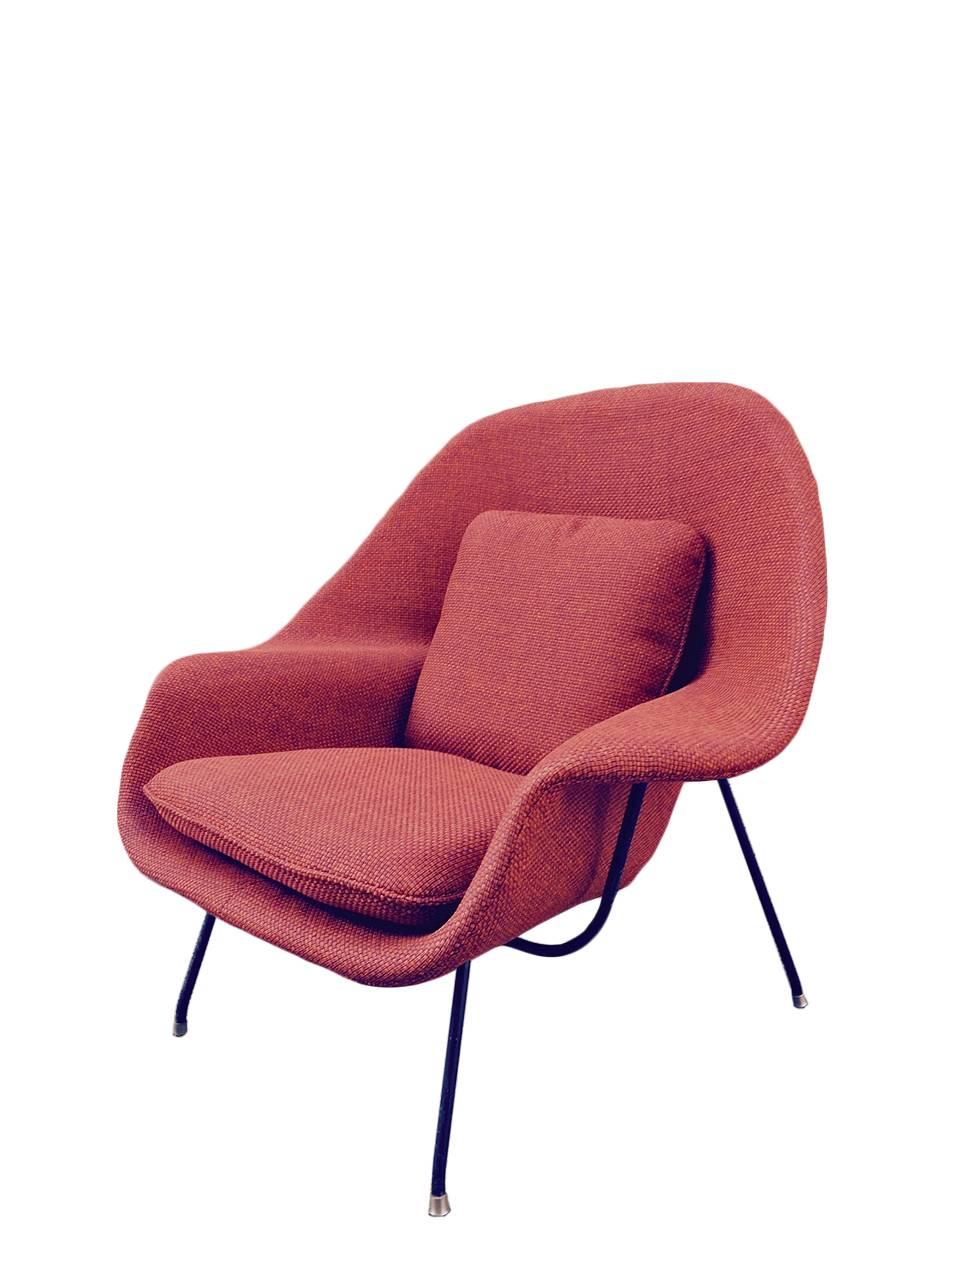 Chair with ottoman, design Eero Saarinen 1950
Model (Oversize)
The structure of this chair consists of a shell of plastic material, with the addition of a special fiber which allows to fix the upholstery by means of bullette.è fully upholstered,